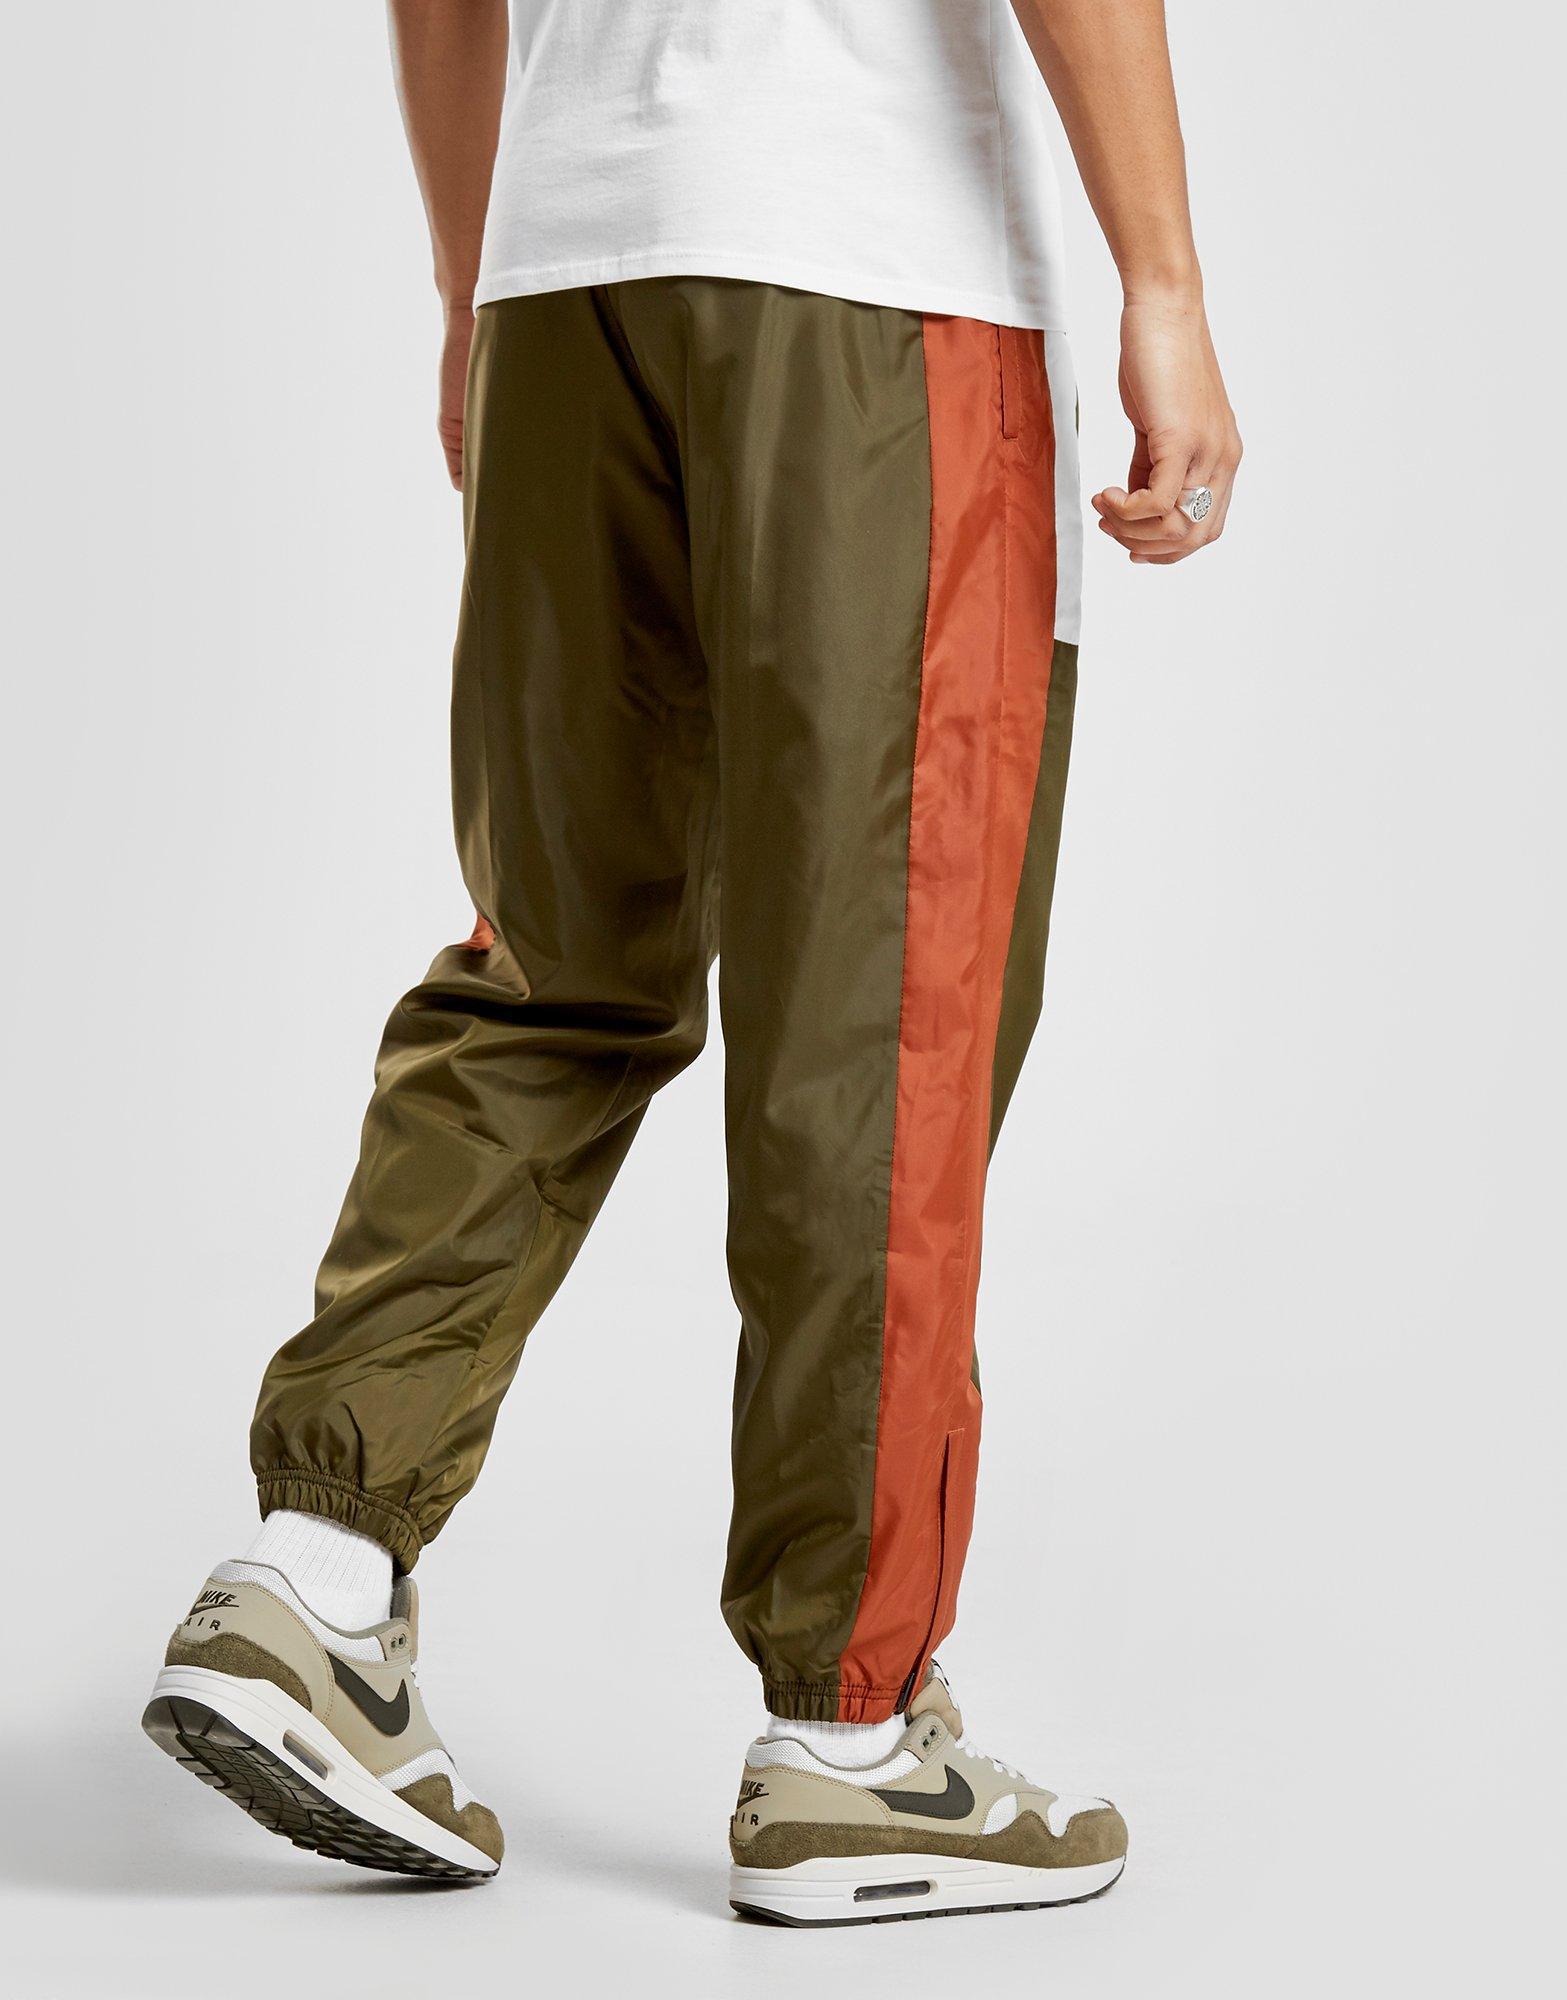 Nike Synthetic Reissue Woven Track Pants in Green/Orange/White (Green ...